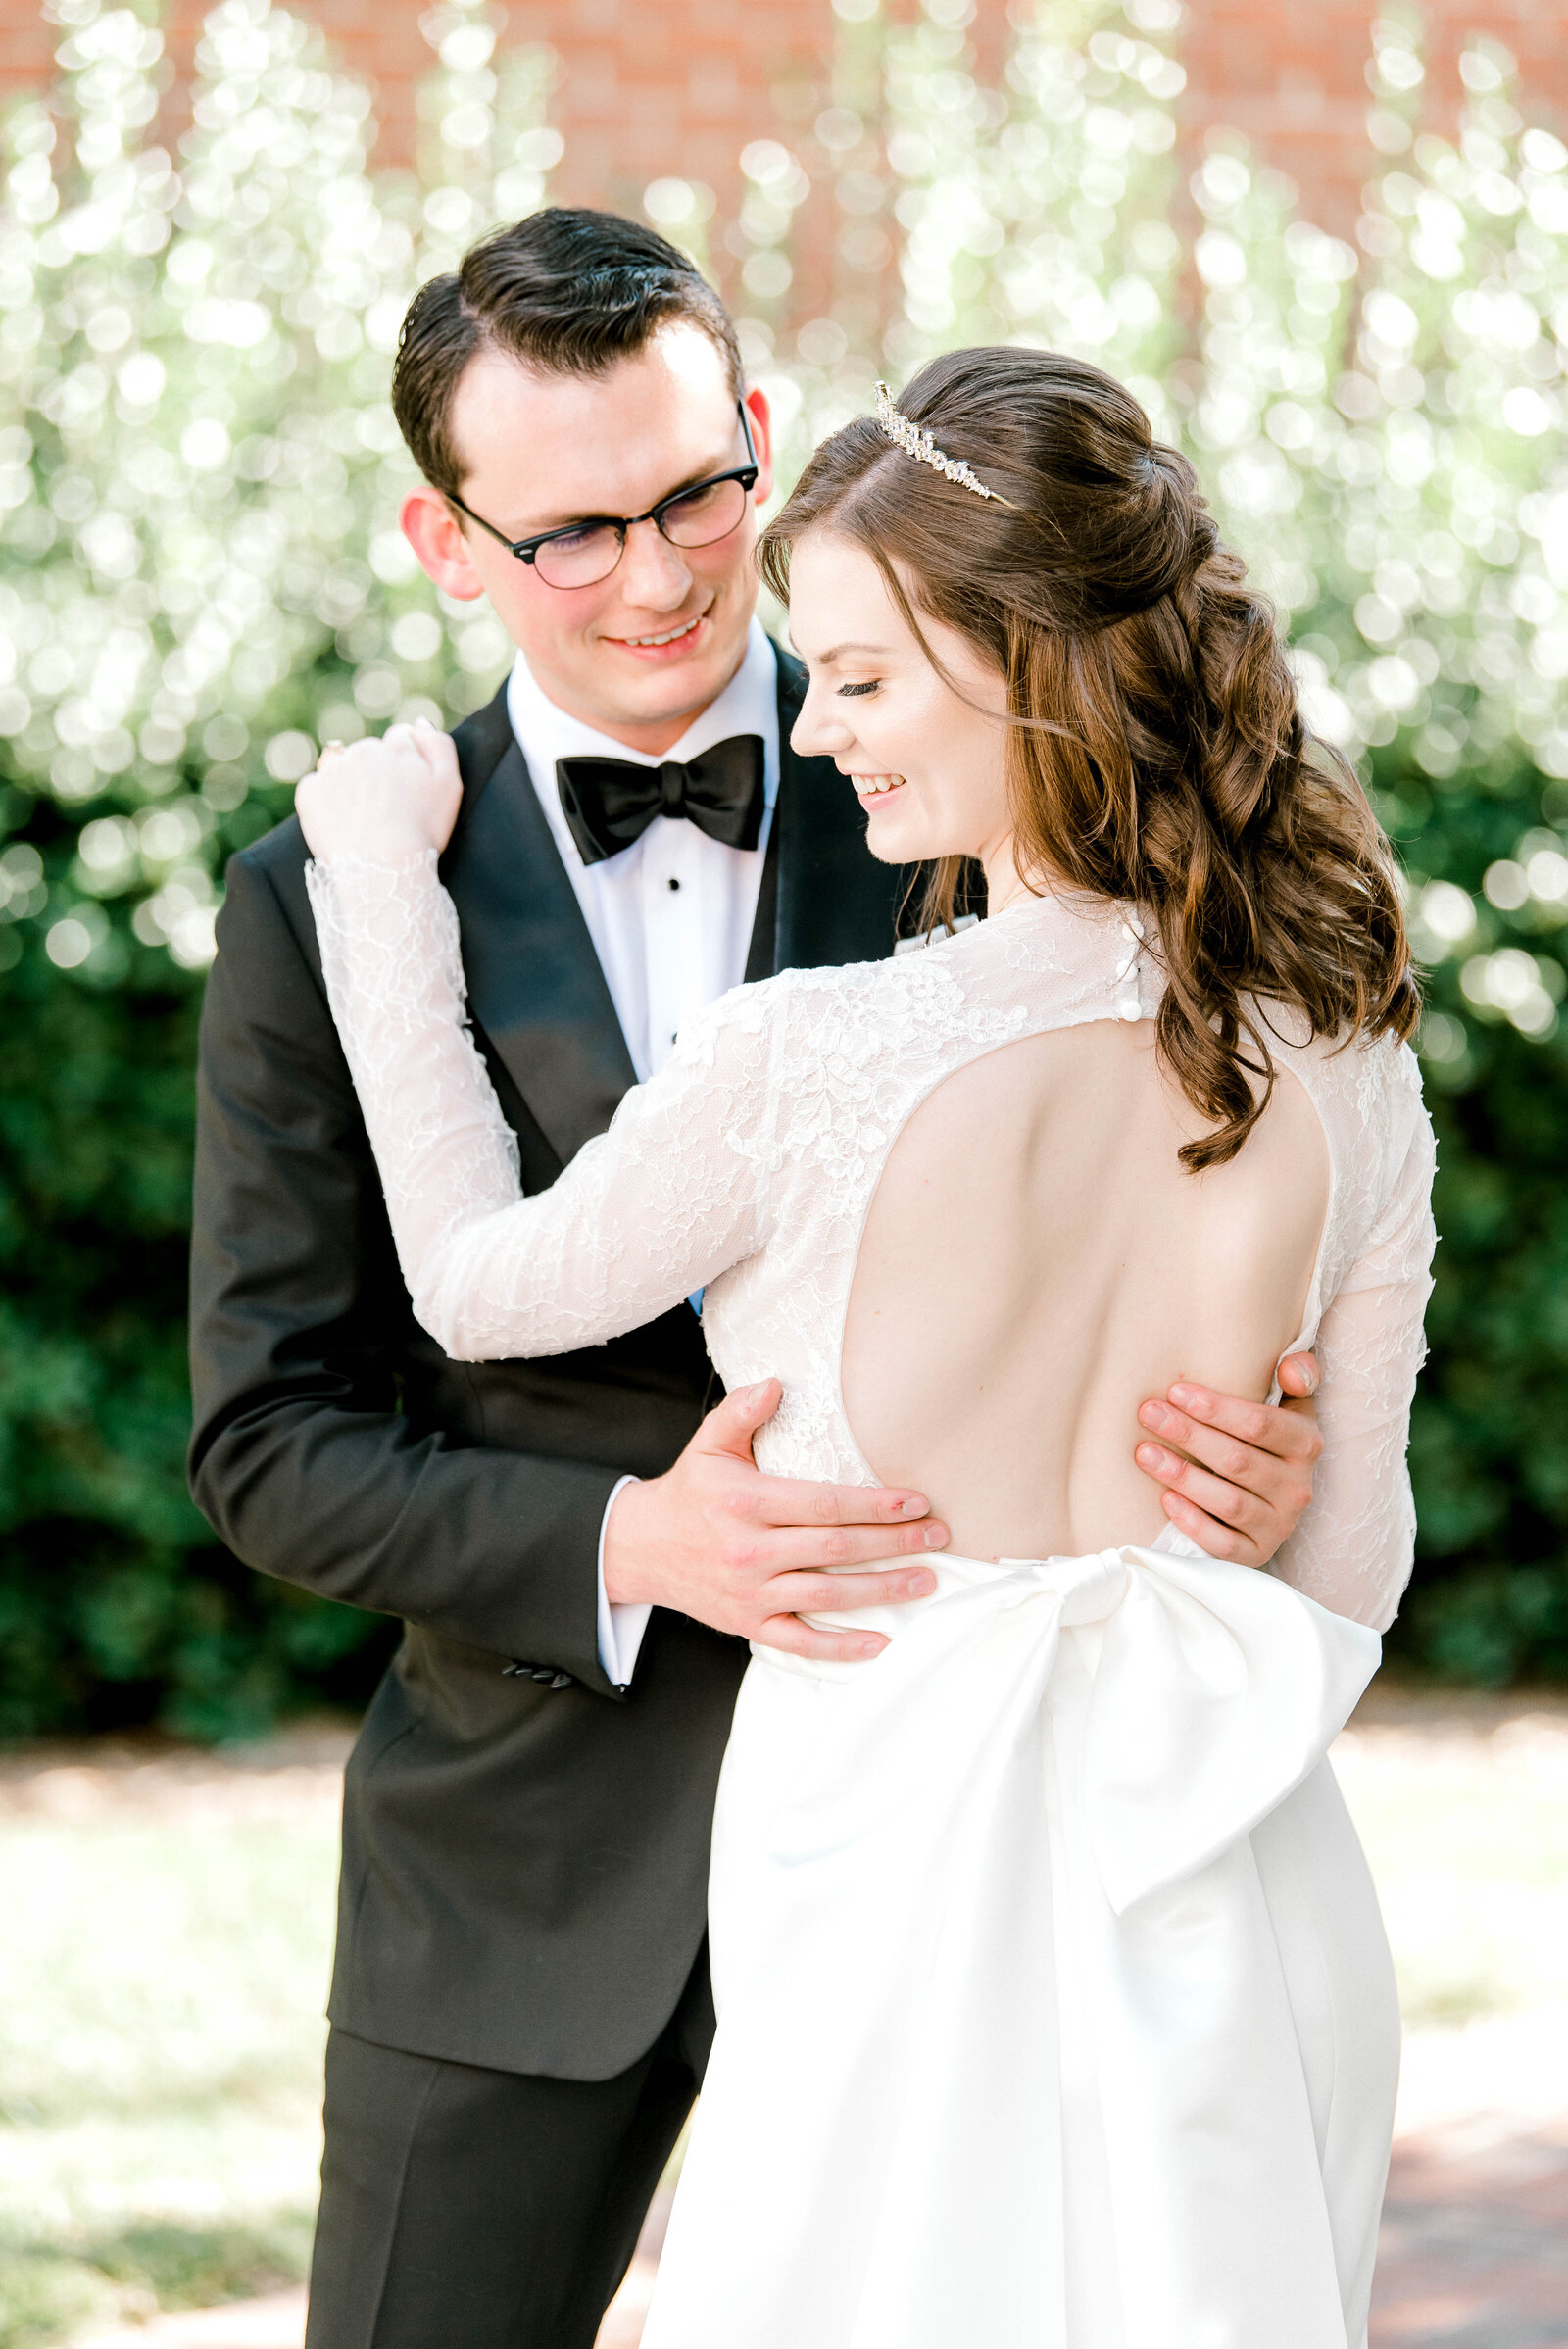 Charlotte-Wedding-Photographer-North-Carolina-Bright-and-Airy-Alyssa-Frost-Photography-Hotel-Concord-10